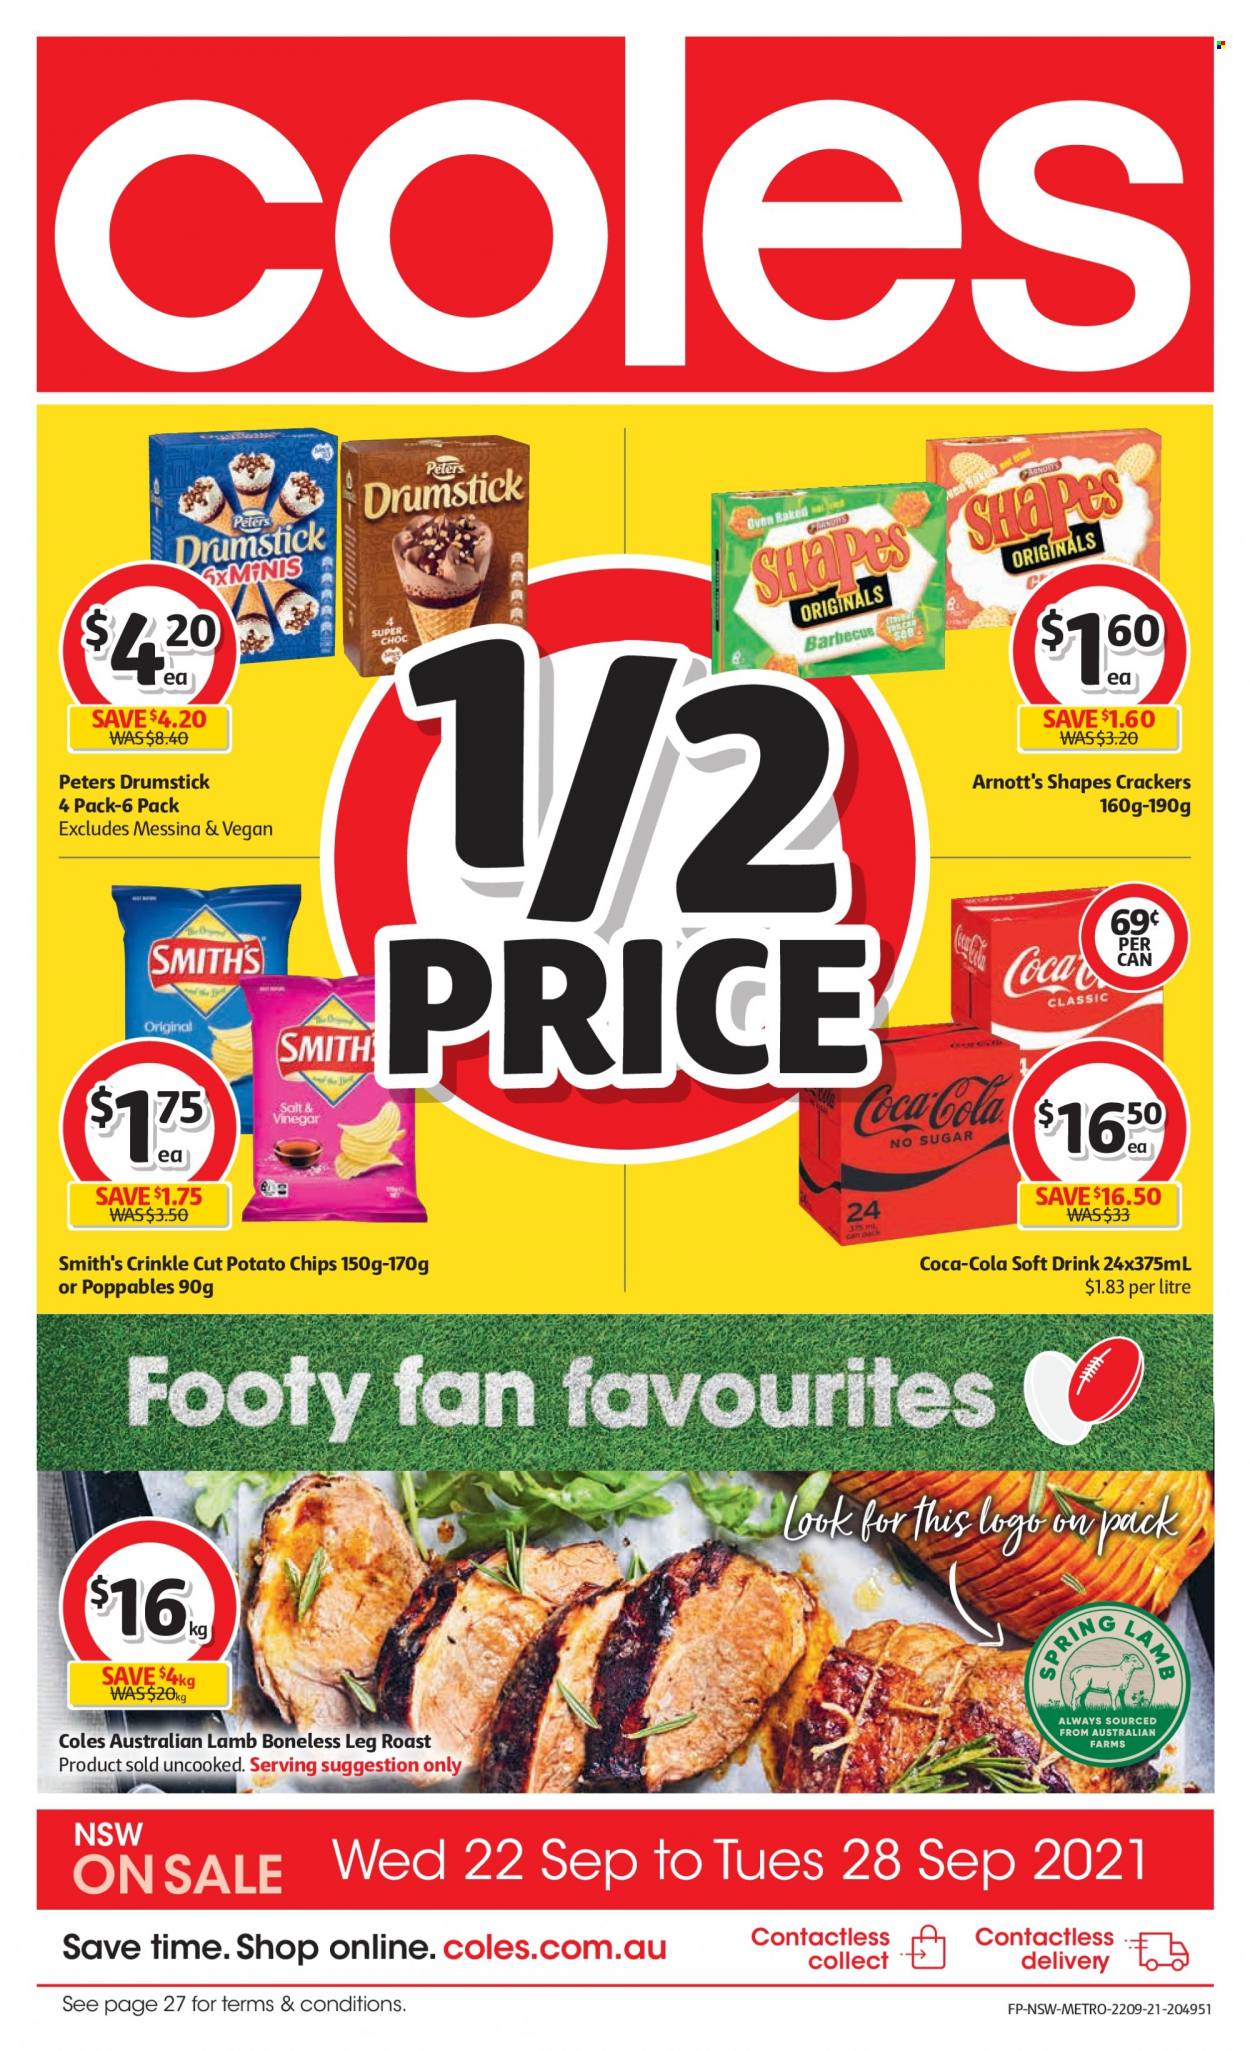 thumbnail - Coles Catalogue - 22 Sep 2021 - 28 Sep 2021 - Sales products - crackers, potato chips, chips, Smith's, Coca-Cola, soft drink. Page 1.